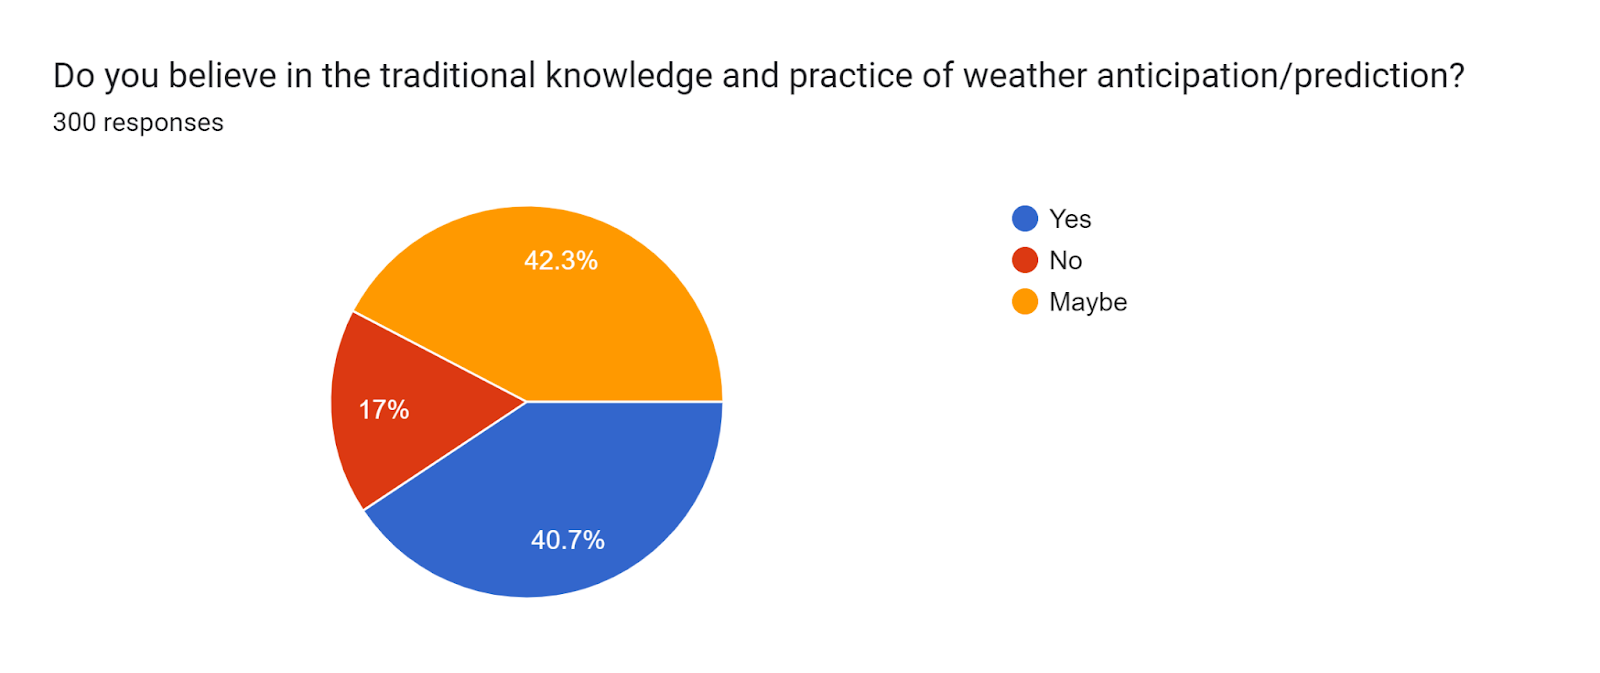 Forms response chart. Question title: Do you believe in the traditional knowledge and practice of weather anticipation/prediction?
. Number of responses: 300 responses.